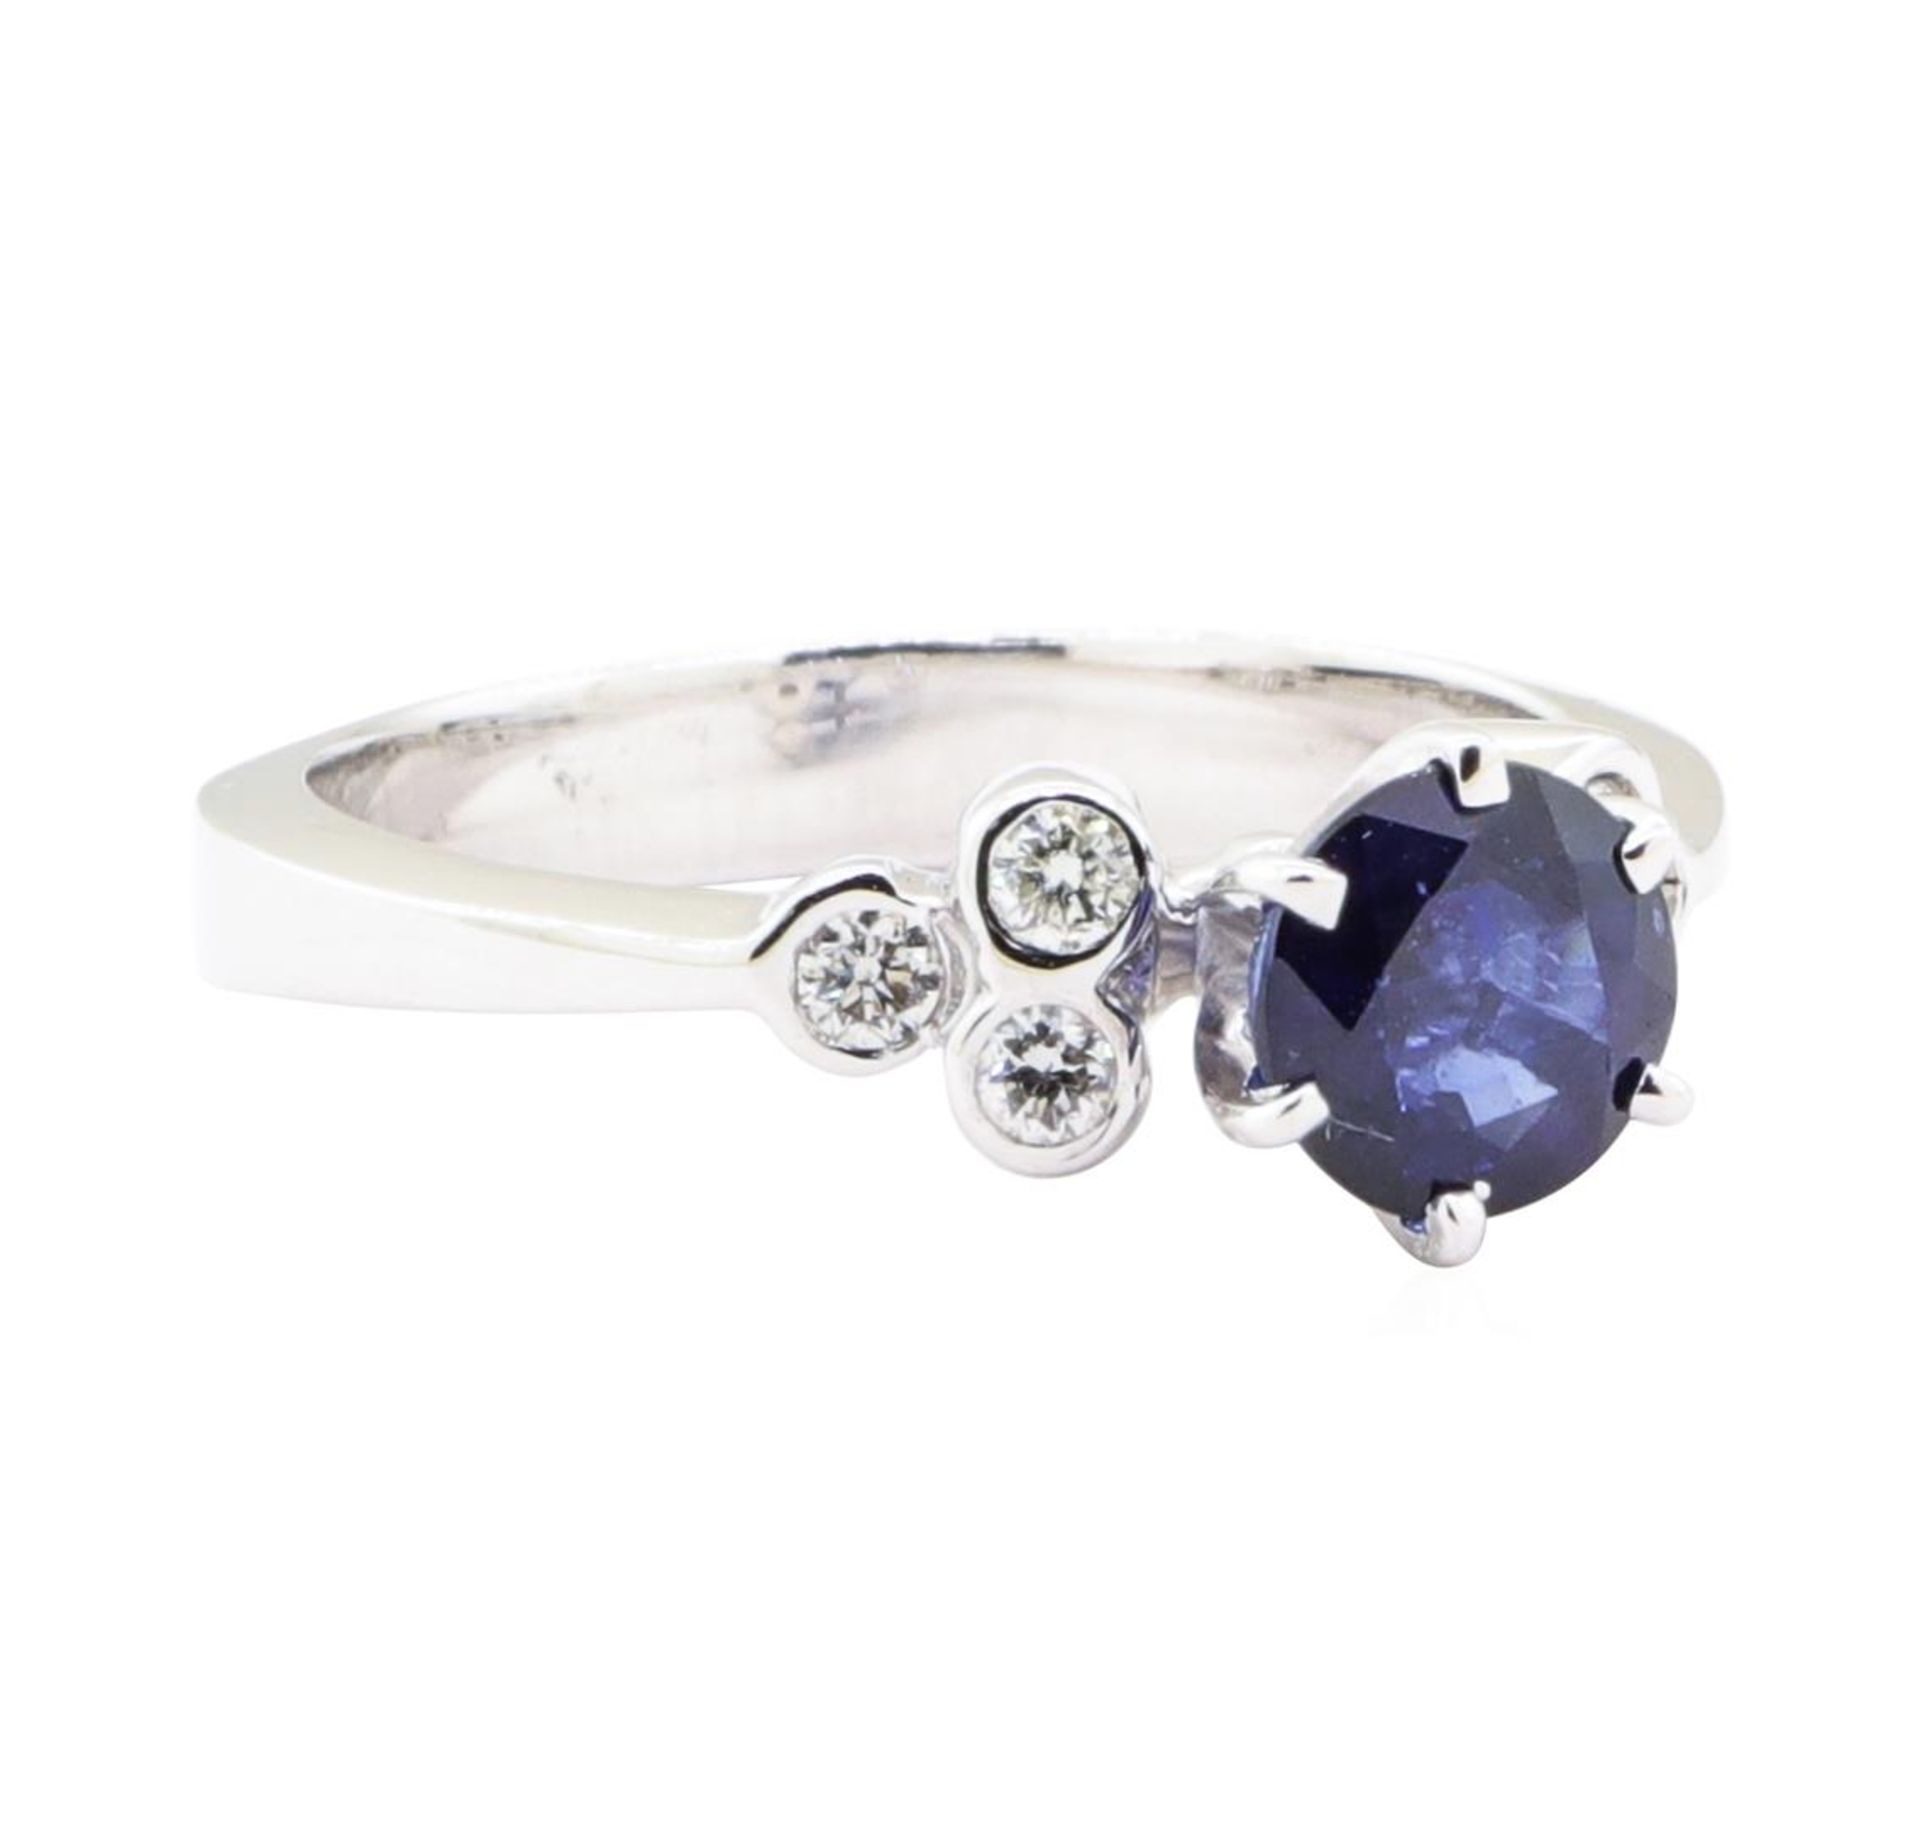 1.44ctw Sapphire and Diamond Ring - 18KT White Gold